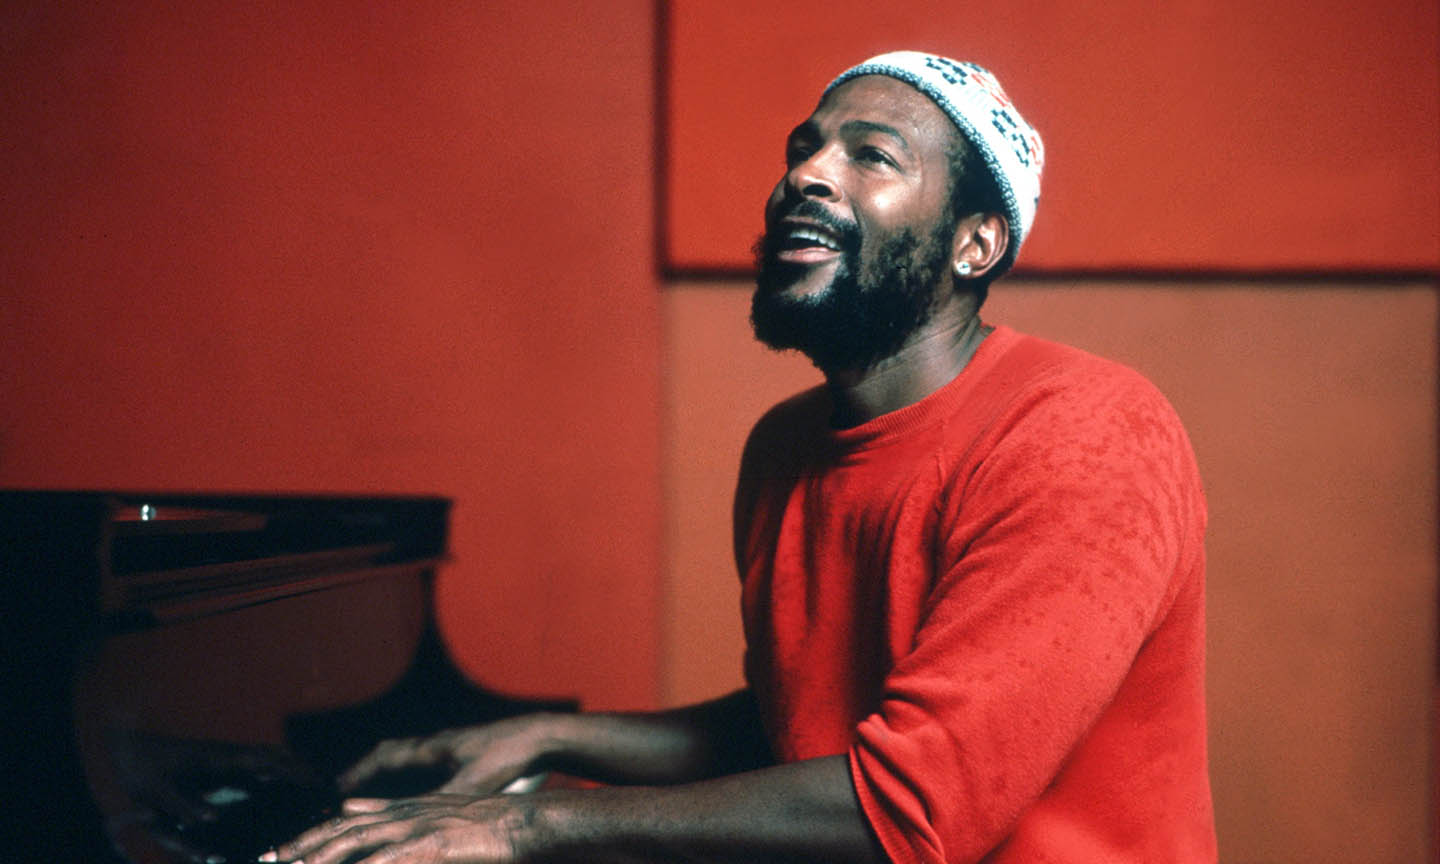 ‘You’re The Man’: ‘Lost’ Marvin Gaye Album Defines An Era Of Soul Music